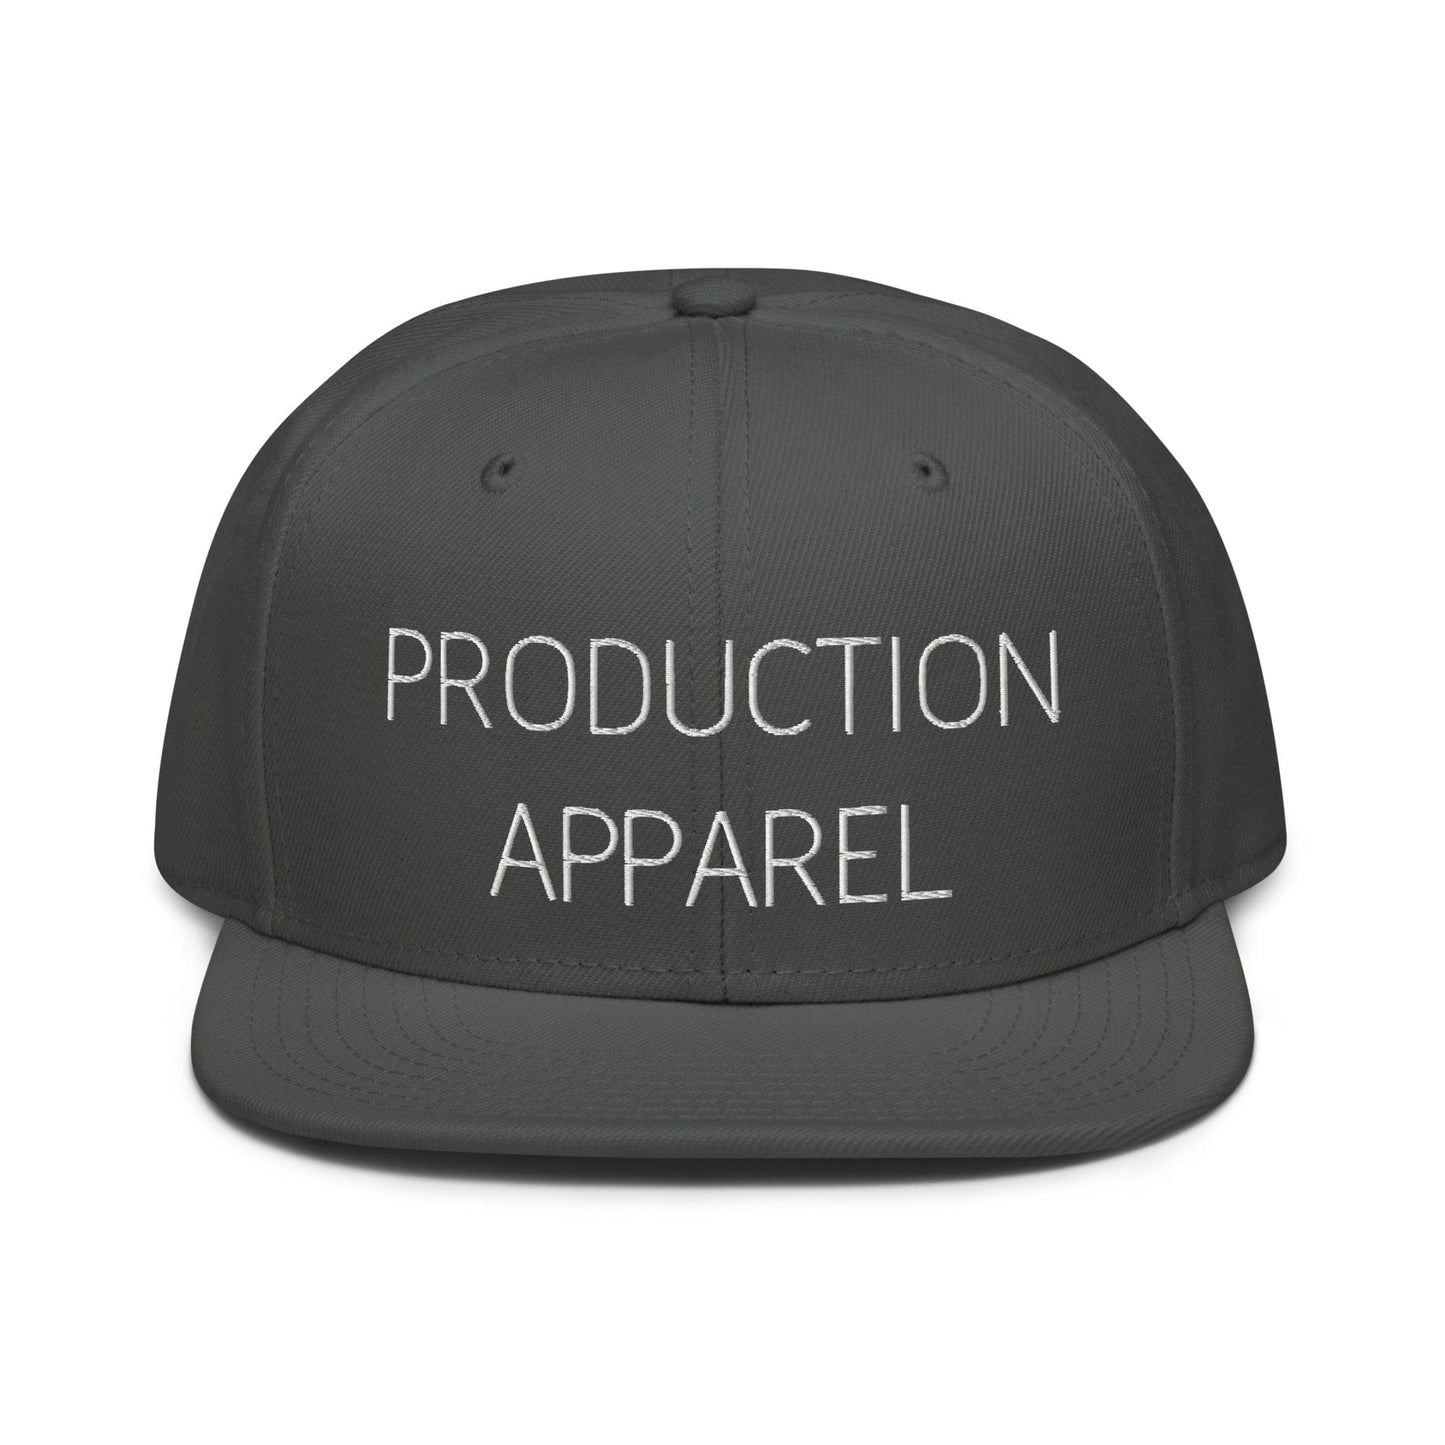 Production Apparel Production Apparel Hat Charcoal gray